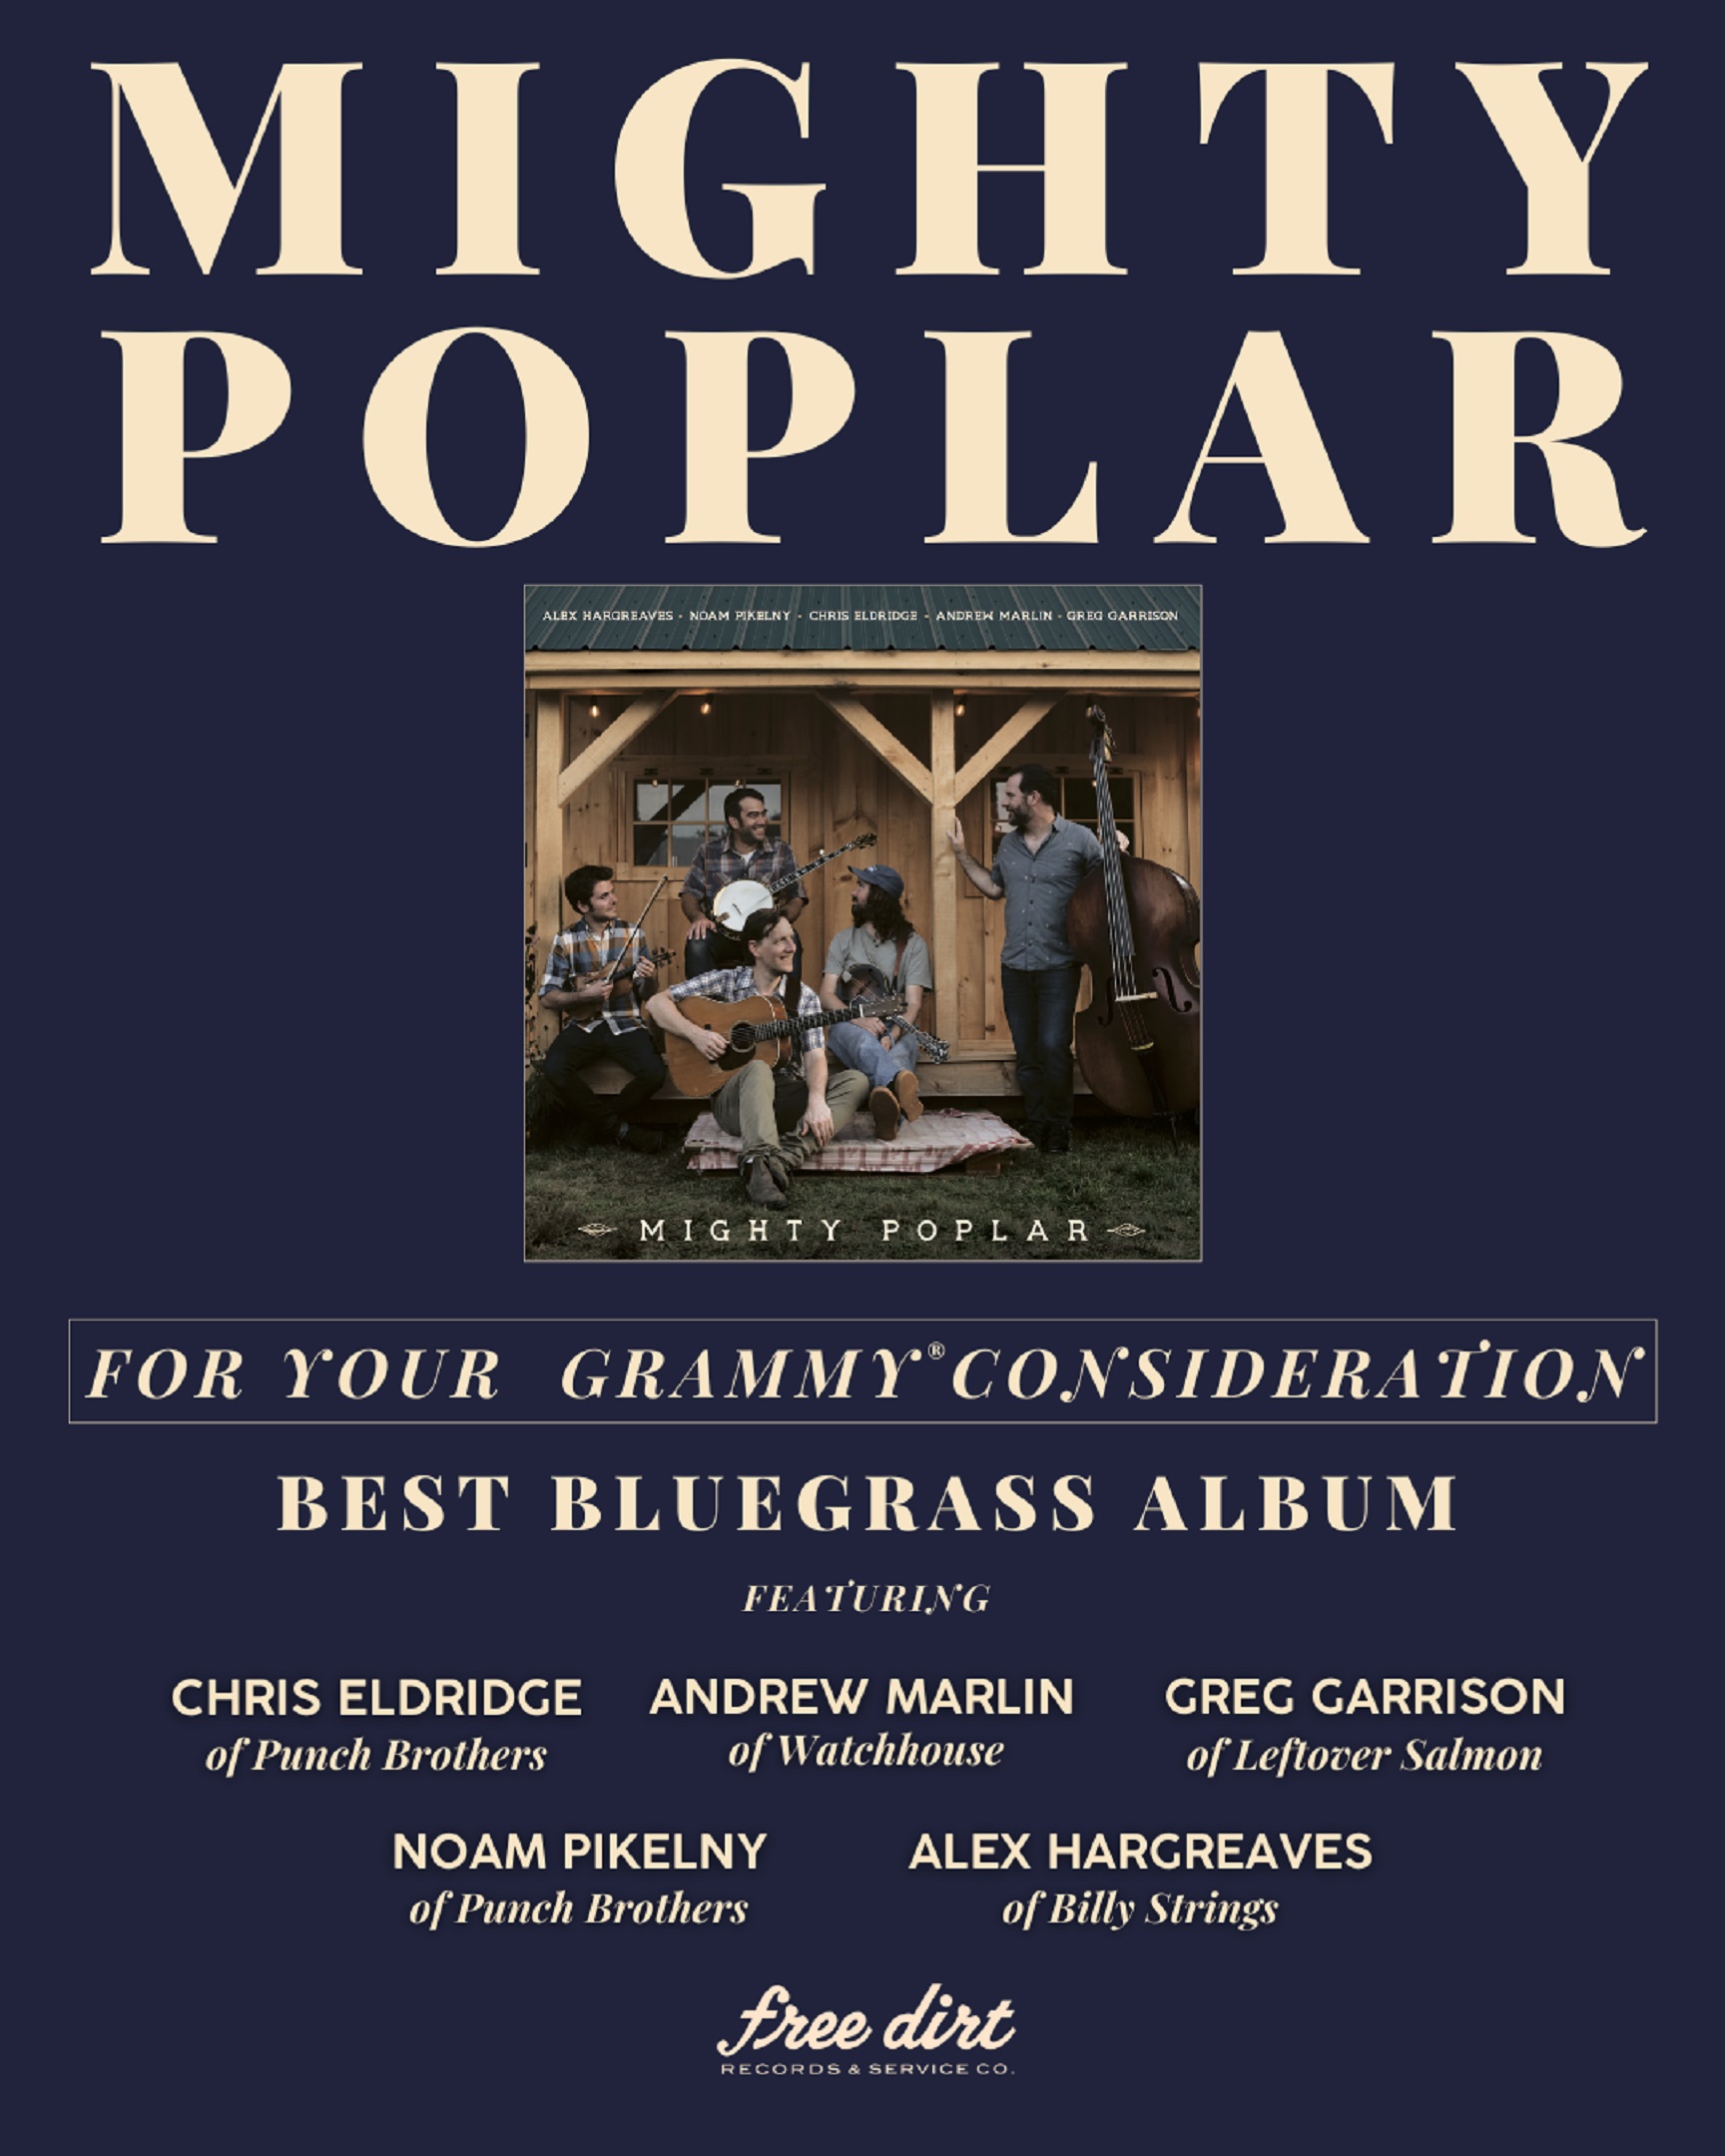 Mighty Poplar Nominated for Best Bluegrass Album at the Grammy Awards